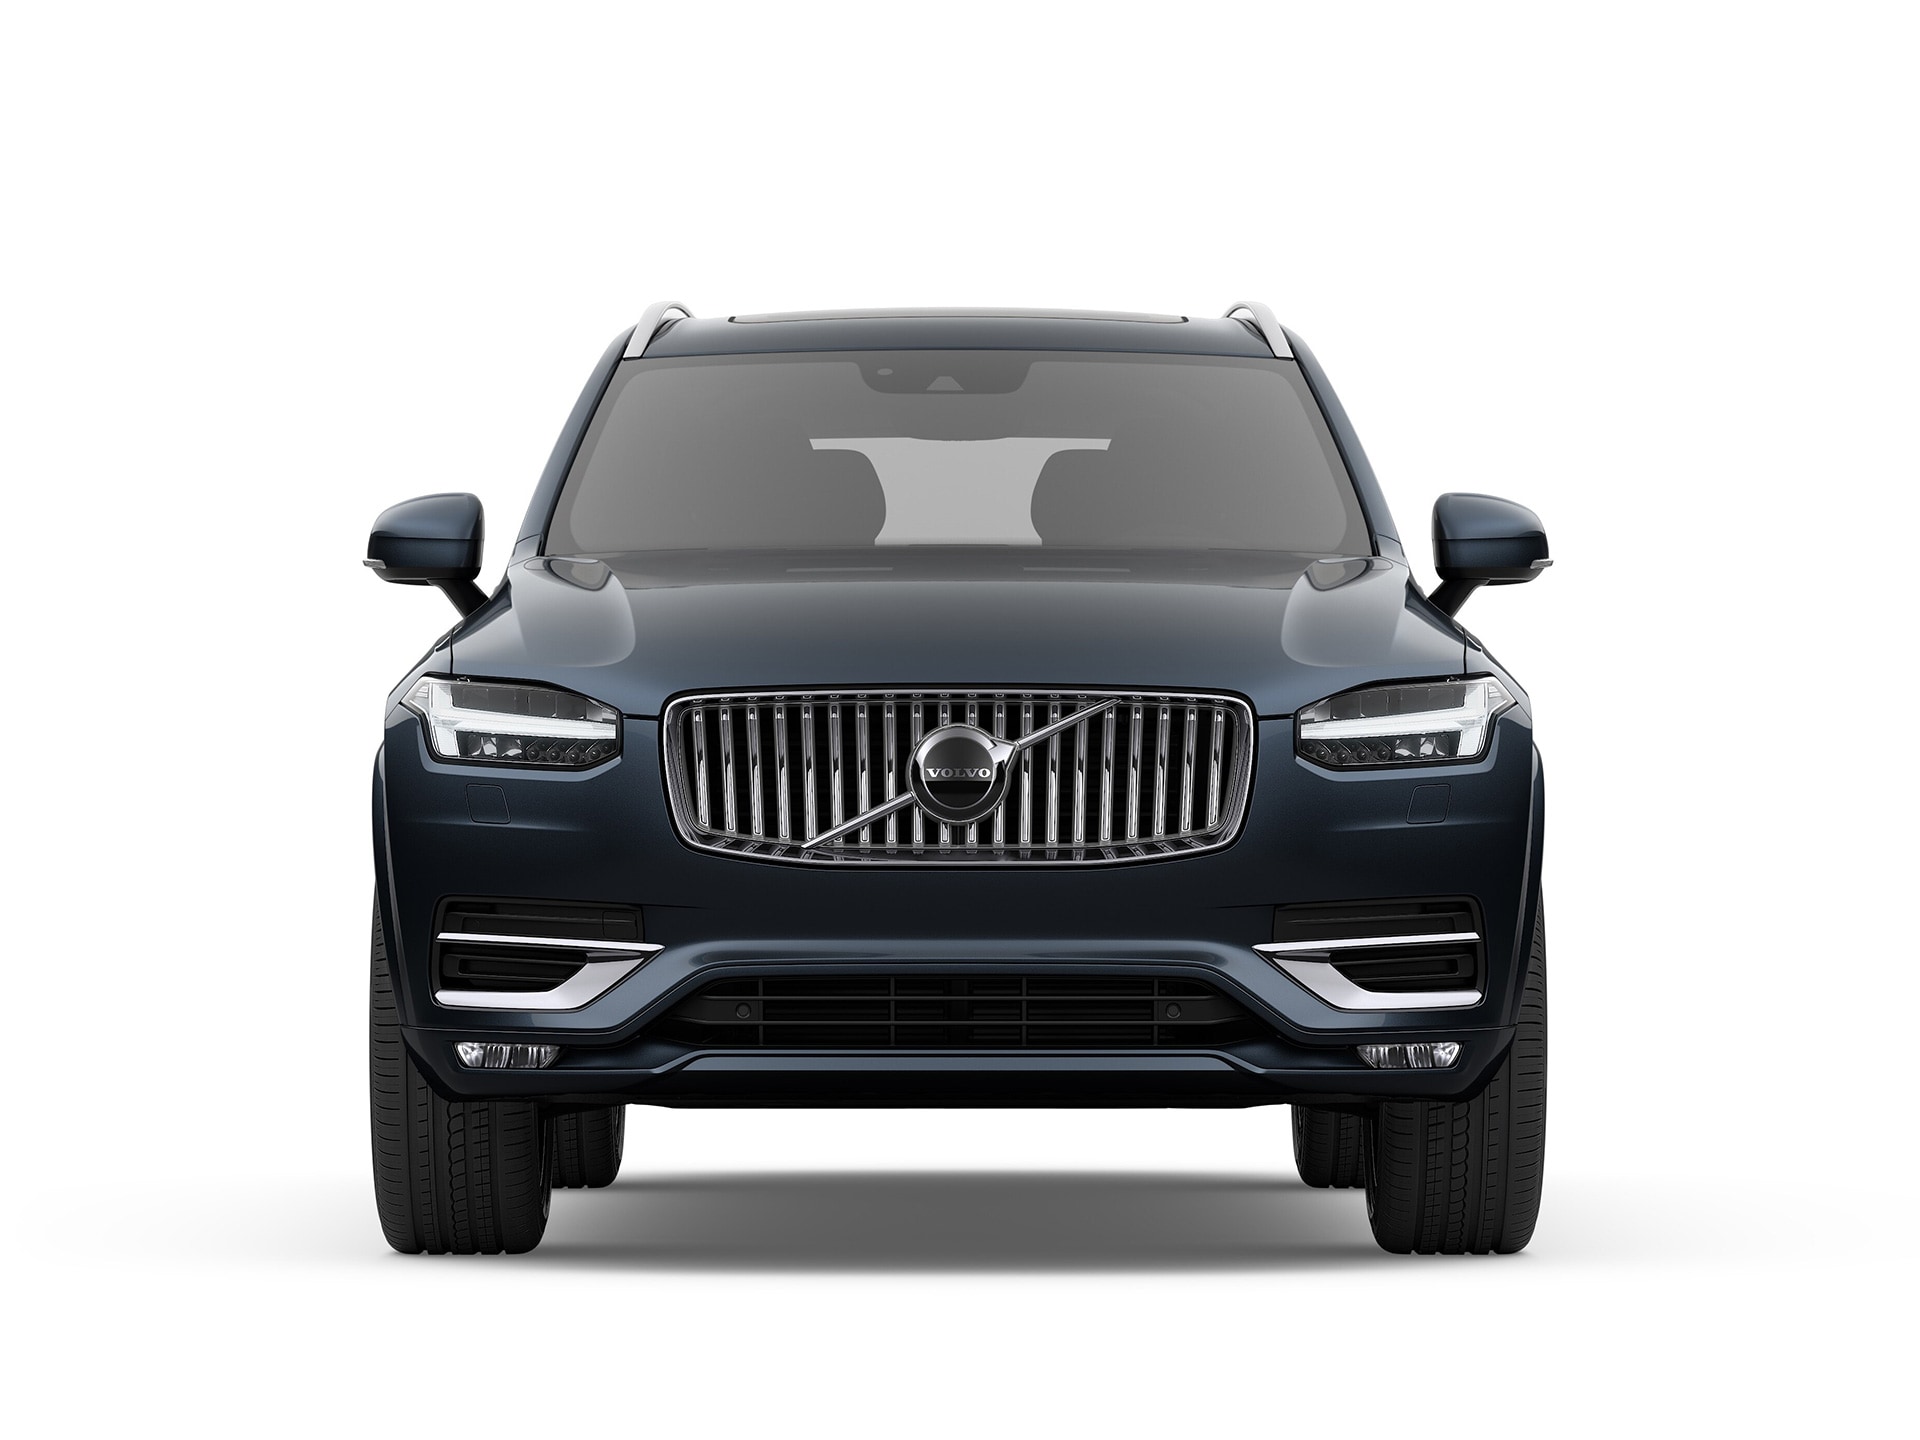 The front of a Volvo XC90 SUV.